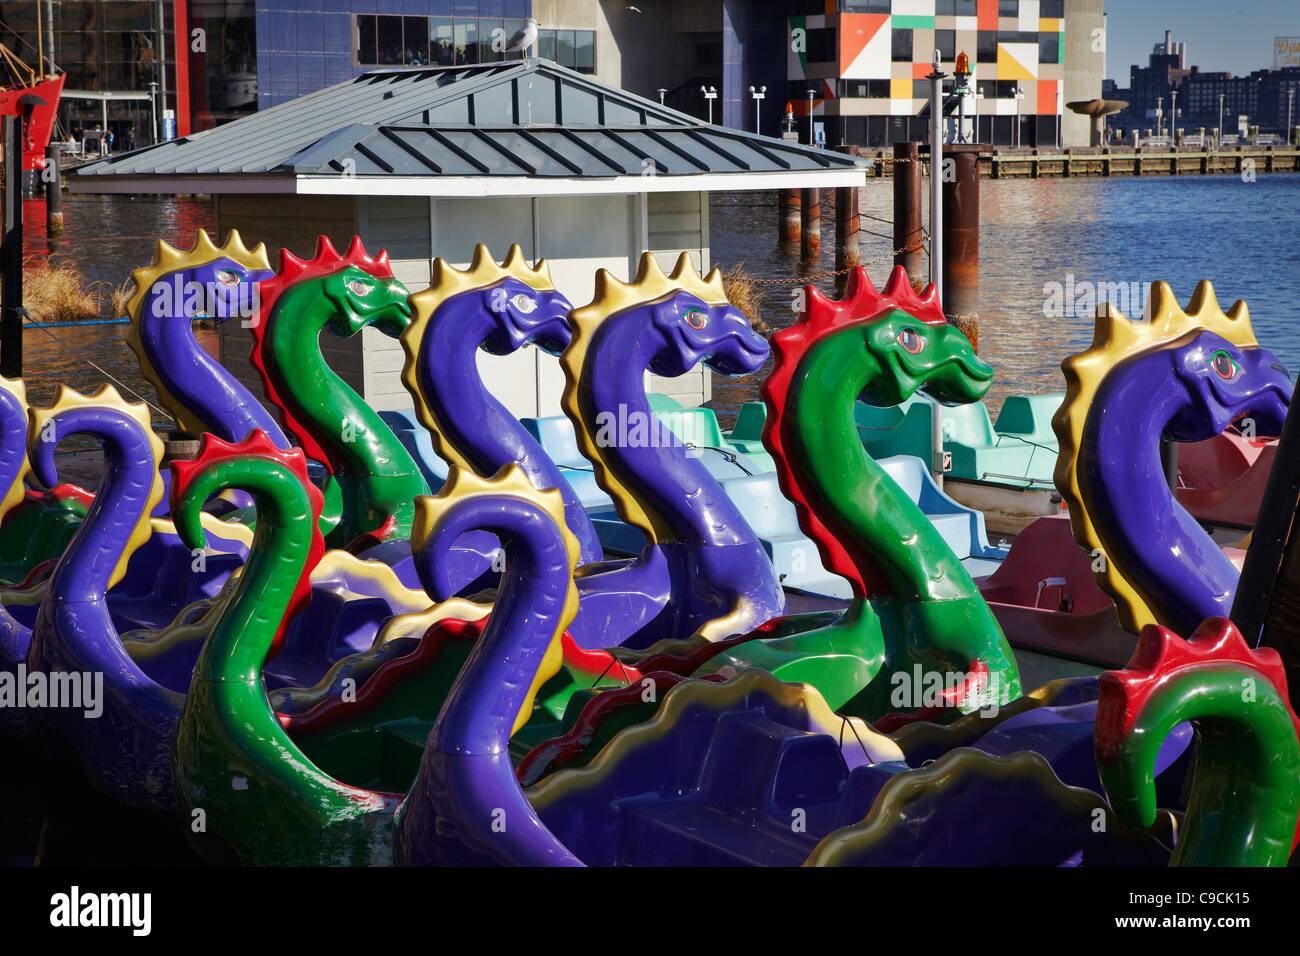 Sea serpent peddle boats moored at the Inner Harbor, Baltimore, Maryland. Stock Photo